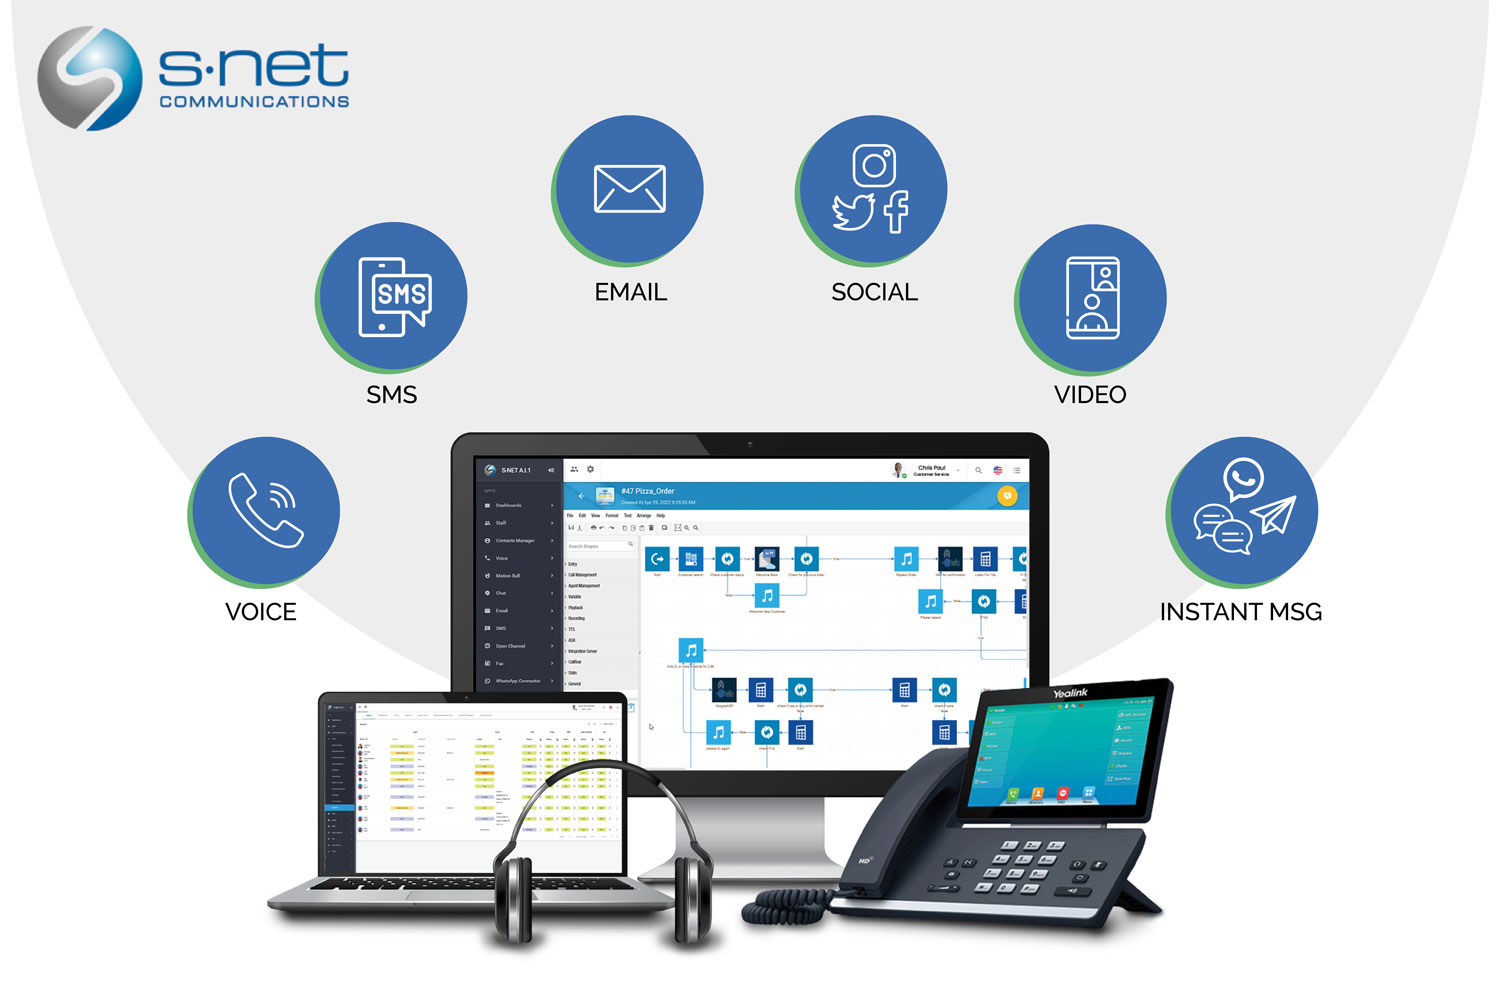 Illustration of S-NET Engage platform and capabilities